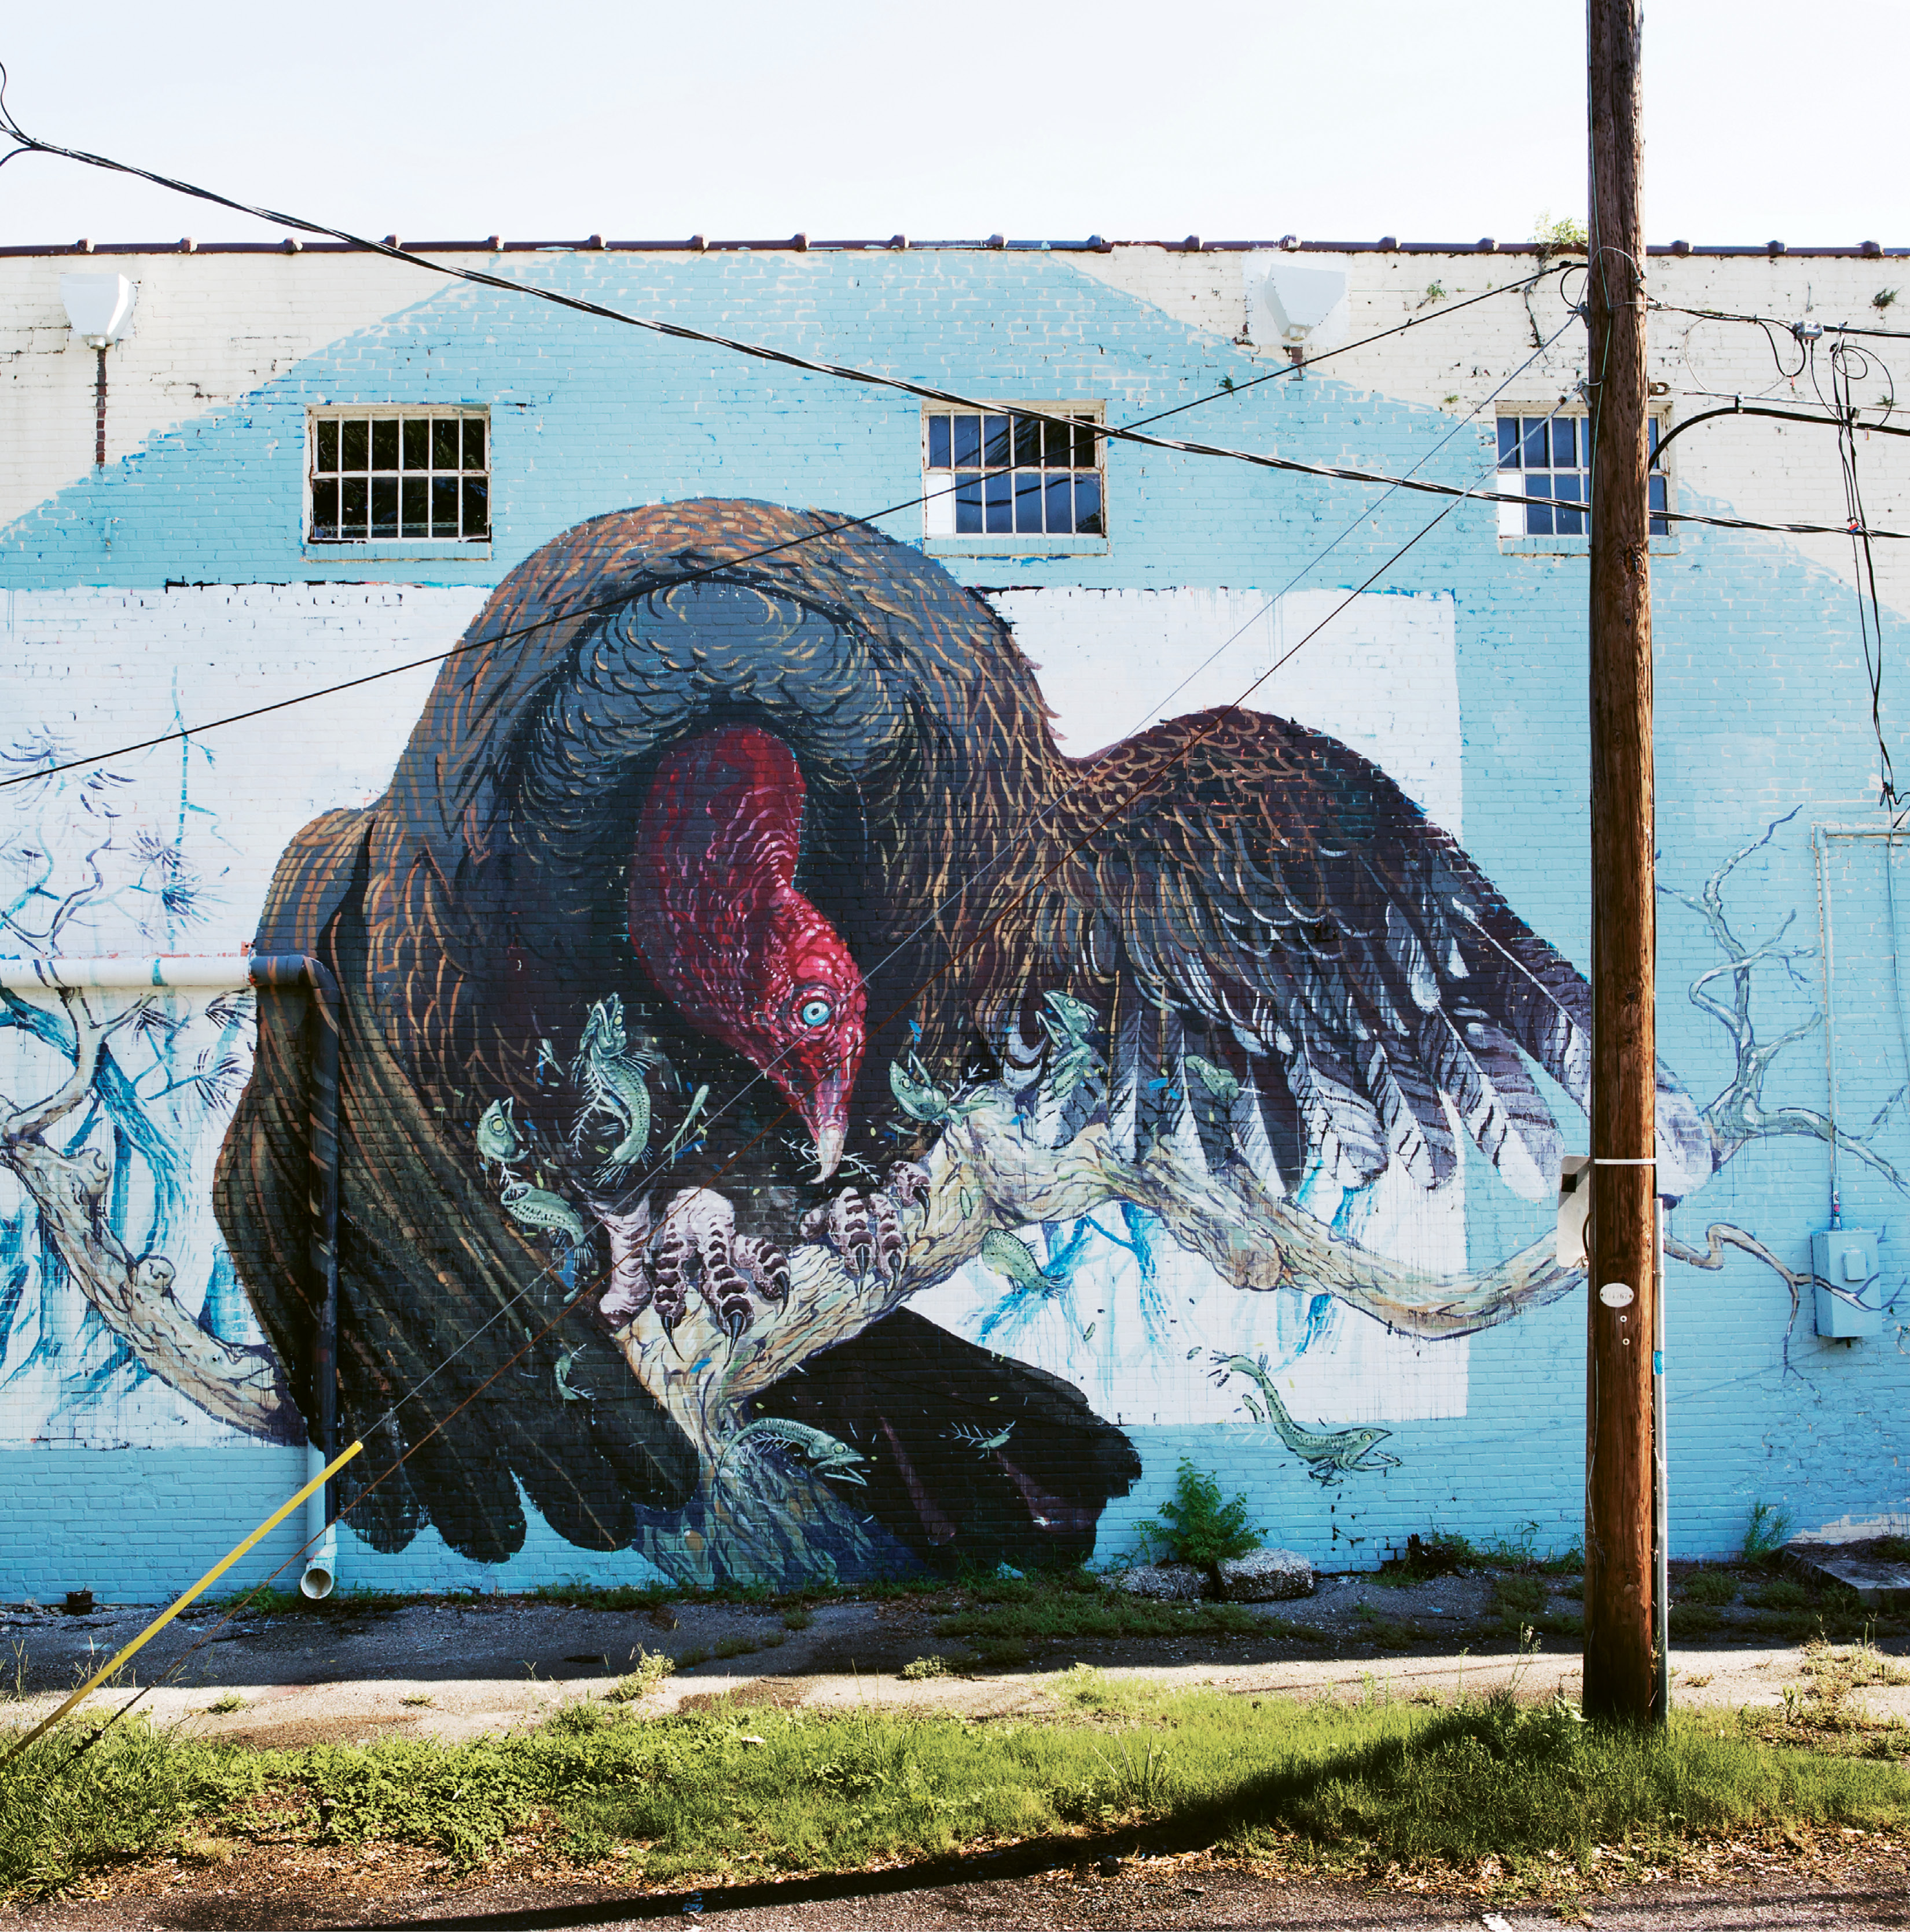 Turkey Vulture by Hitnes  August 2015  on Alycia Alley behind Children’s Cancer Society Thrift Store  (835 Savannah Hwy.)  working with ChART (Charleston Art) outdoor initiative &amp; gallery and enough pie, the Italian muralist produced this work during his journey across the U.S. retracing the steps of John J. Audubon.